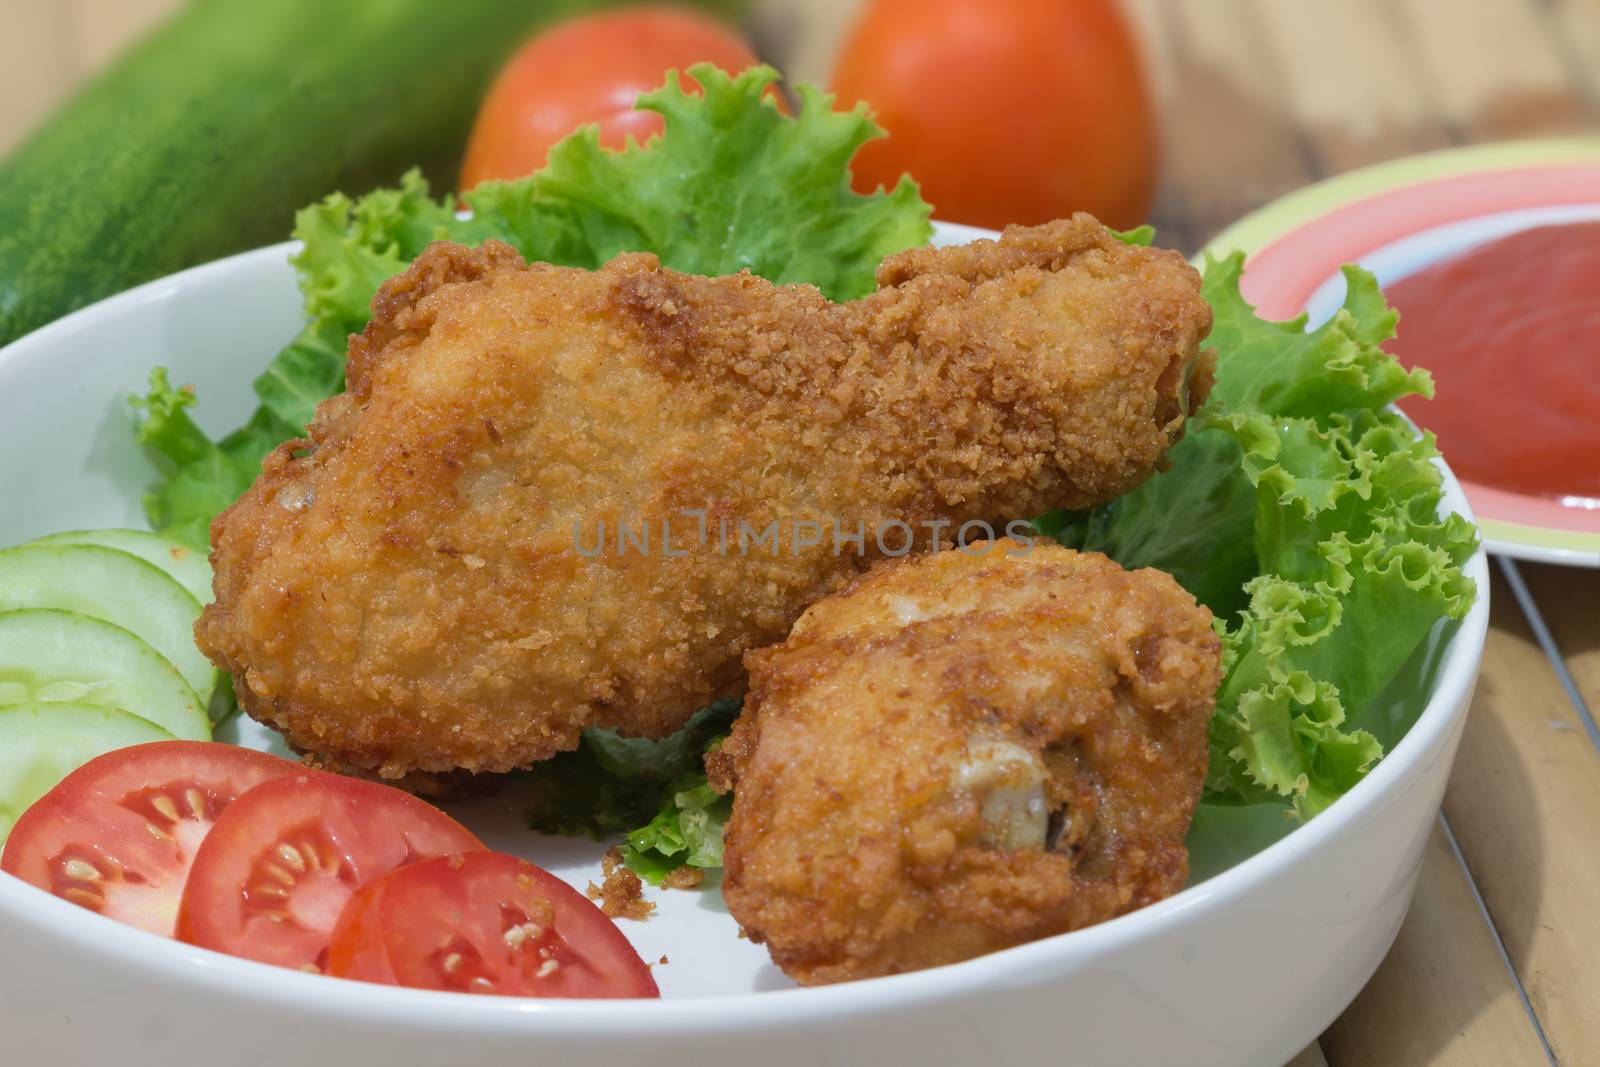 Fried chicken with dip sauce and vegetables